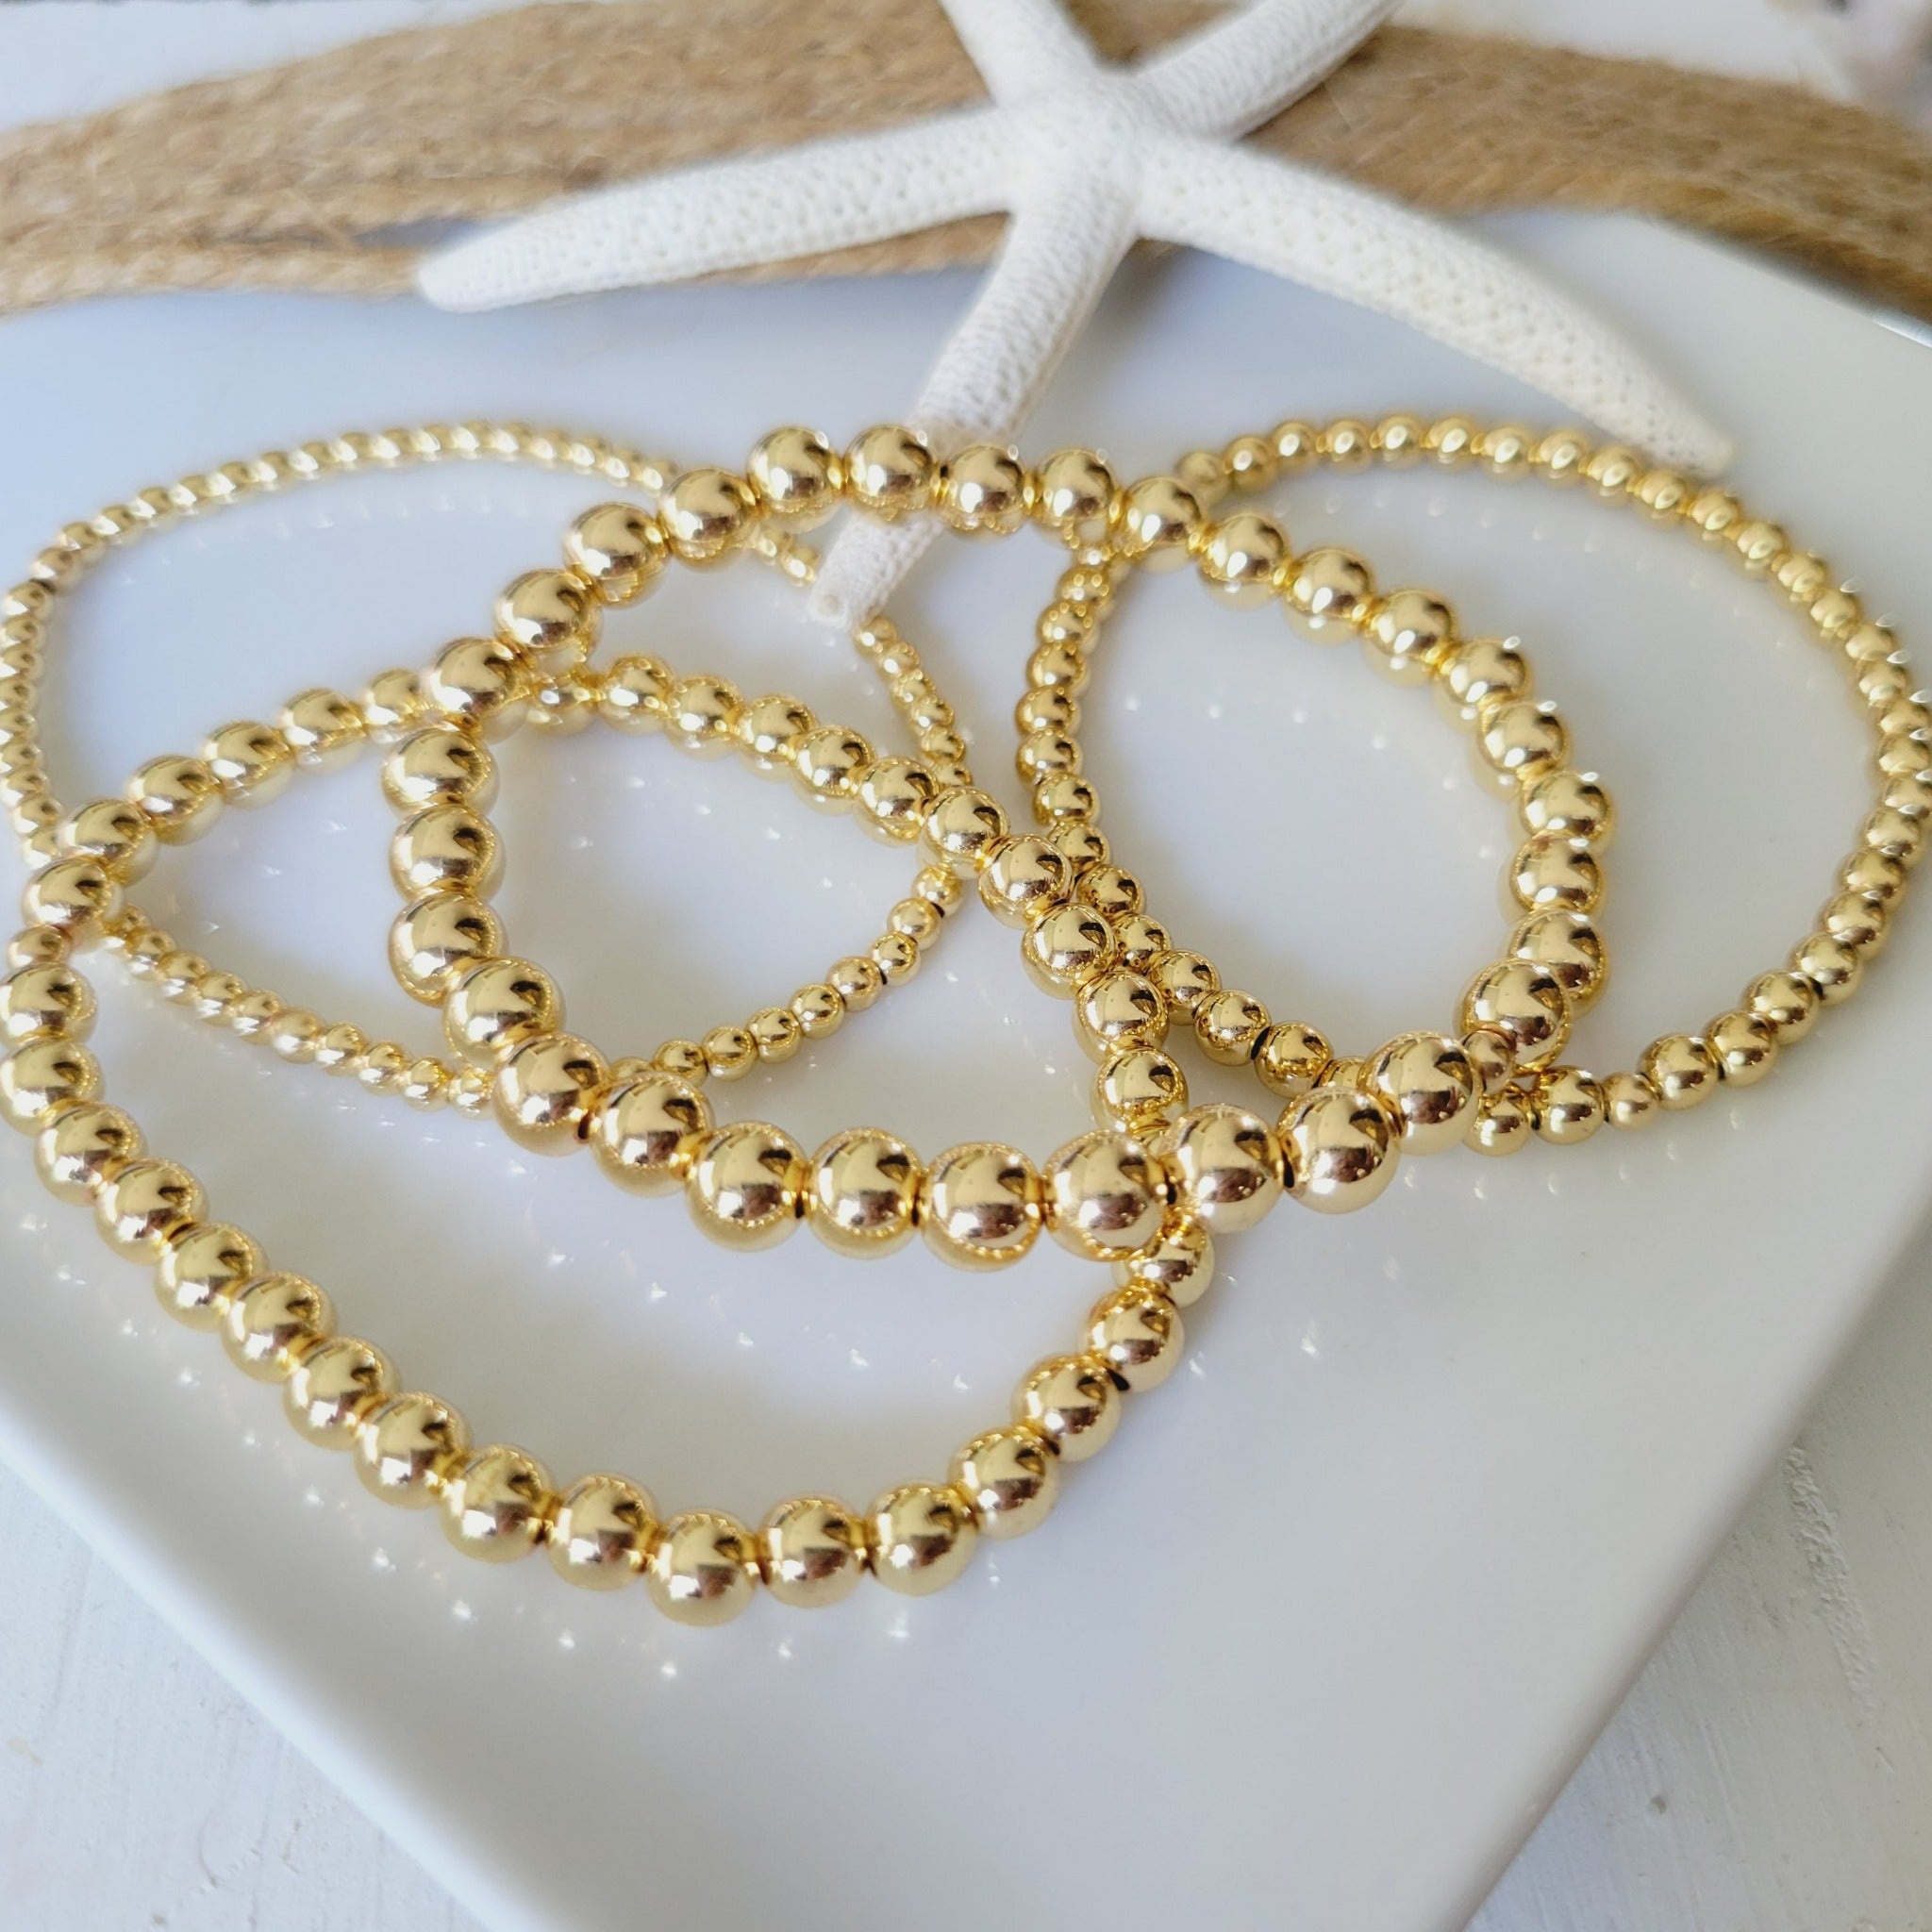 Babies/Toddlers Gold Beaded Stretch or Clasp Keepsake Bracelet - 3mm, 4mm, 5mm